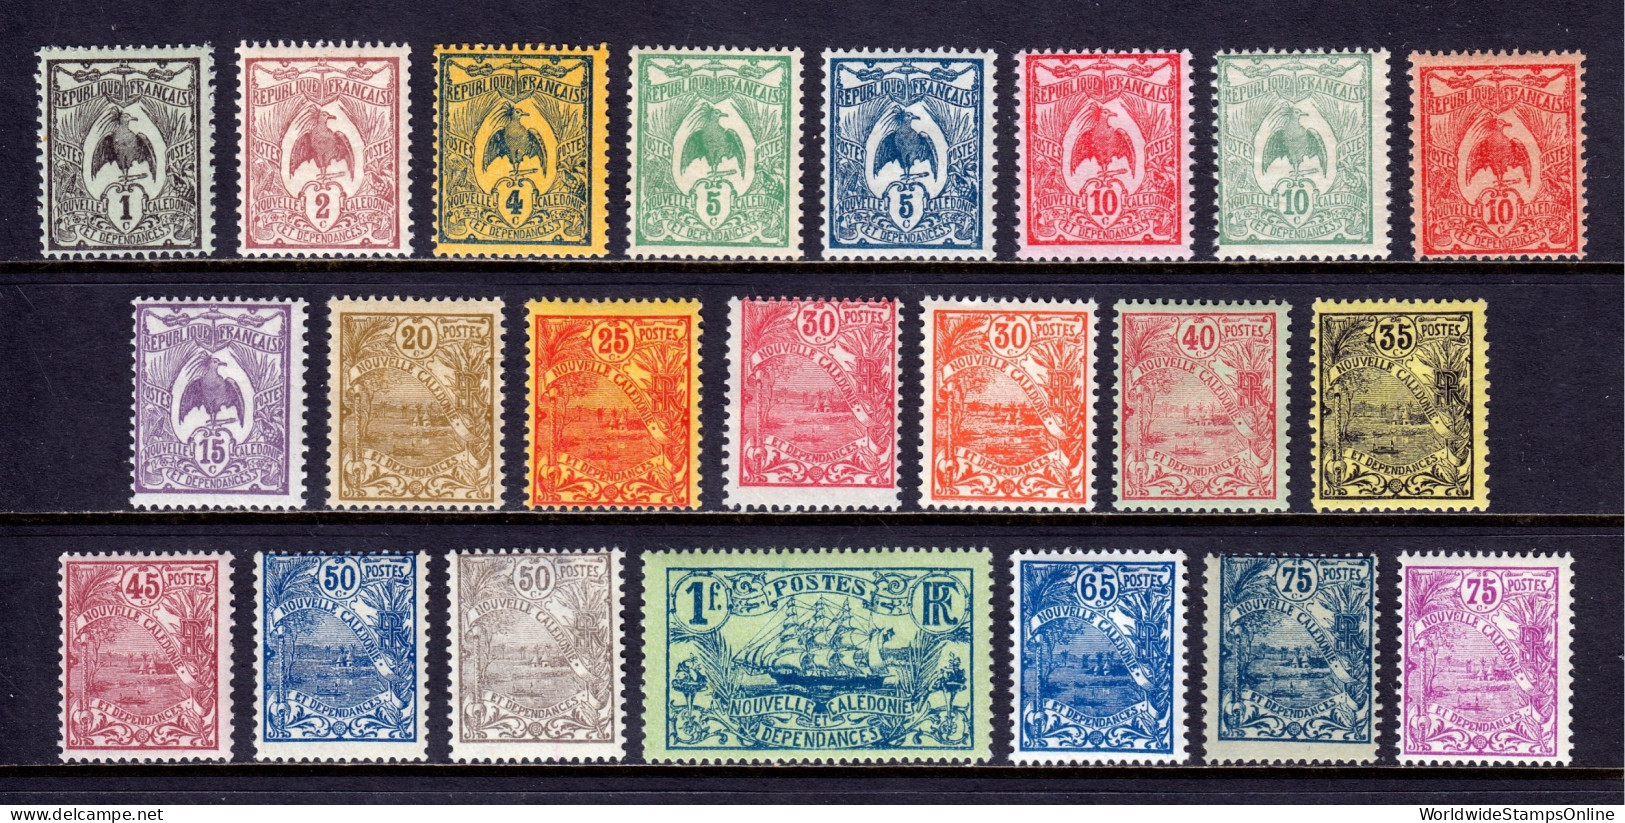 New Caledonia - Scott #88//113 - MH - A Few Thins - SCV $20 - Unused Stamps